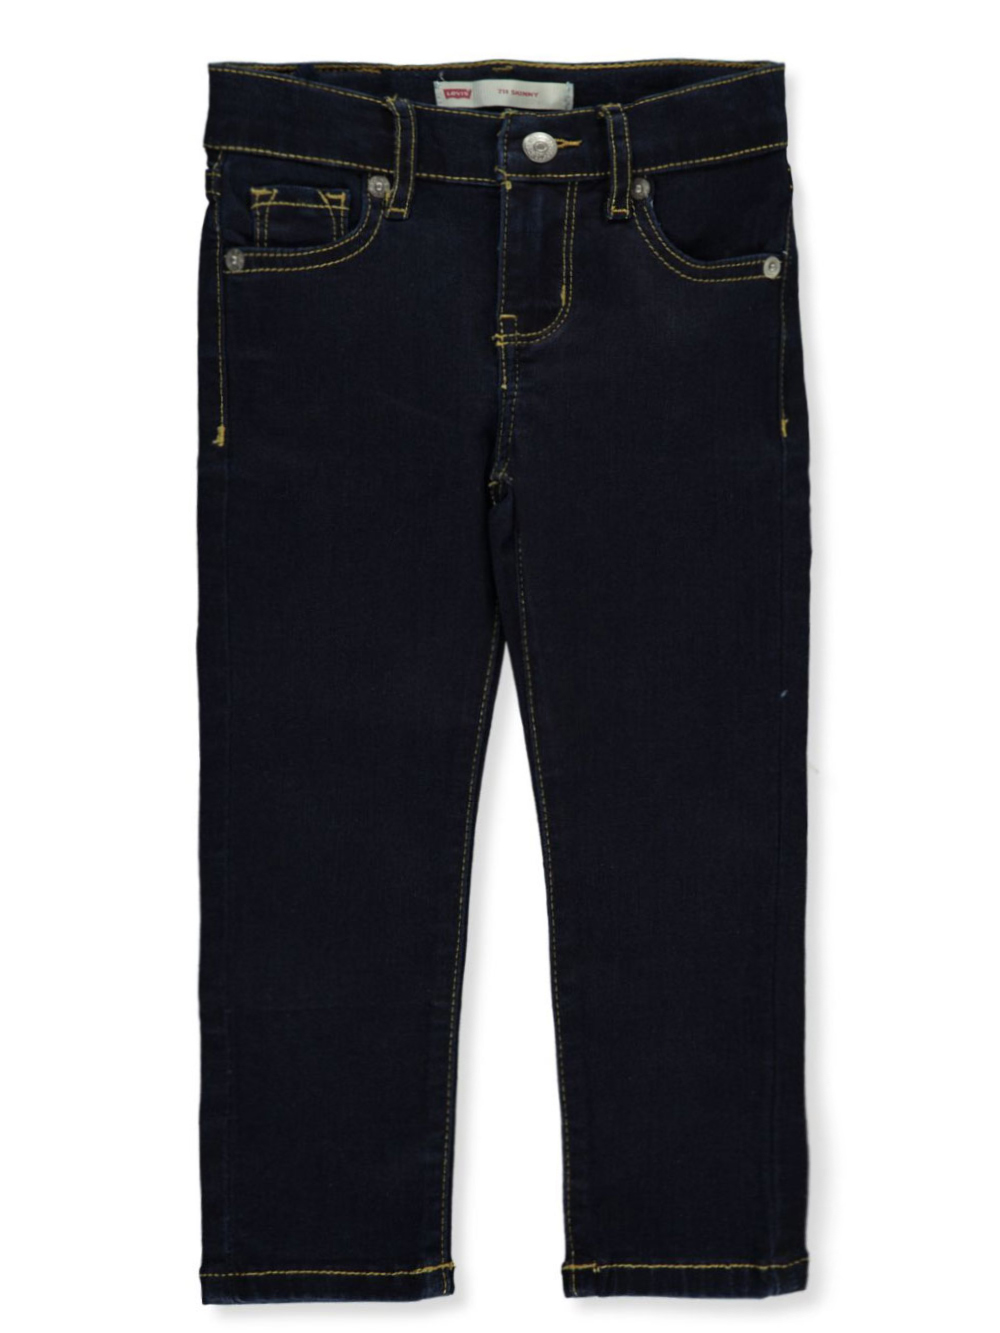 Size 4t Jeans for Girls